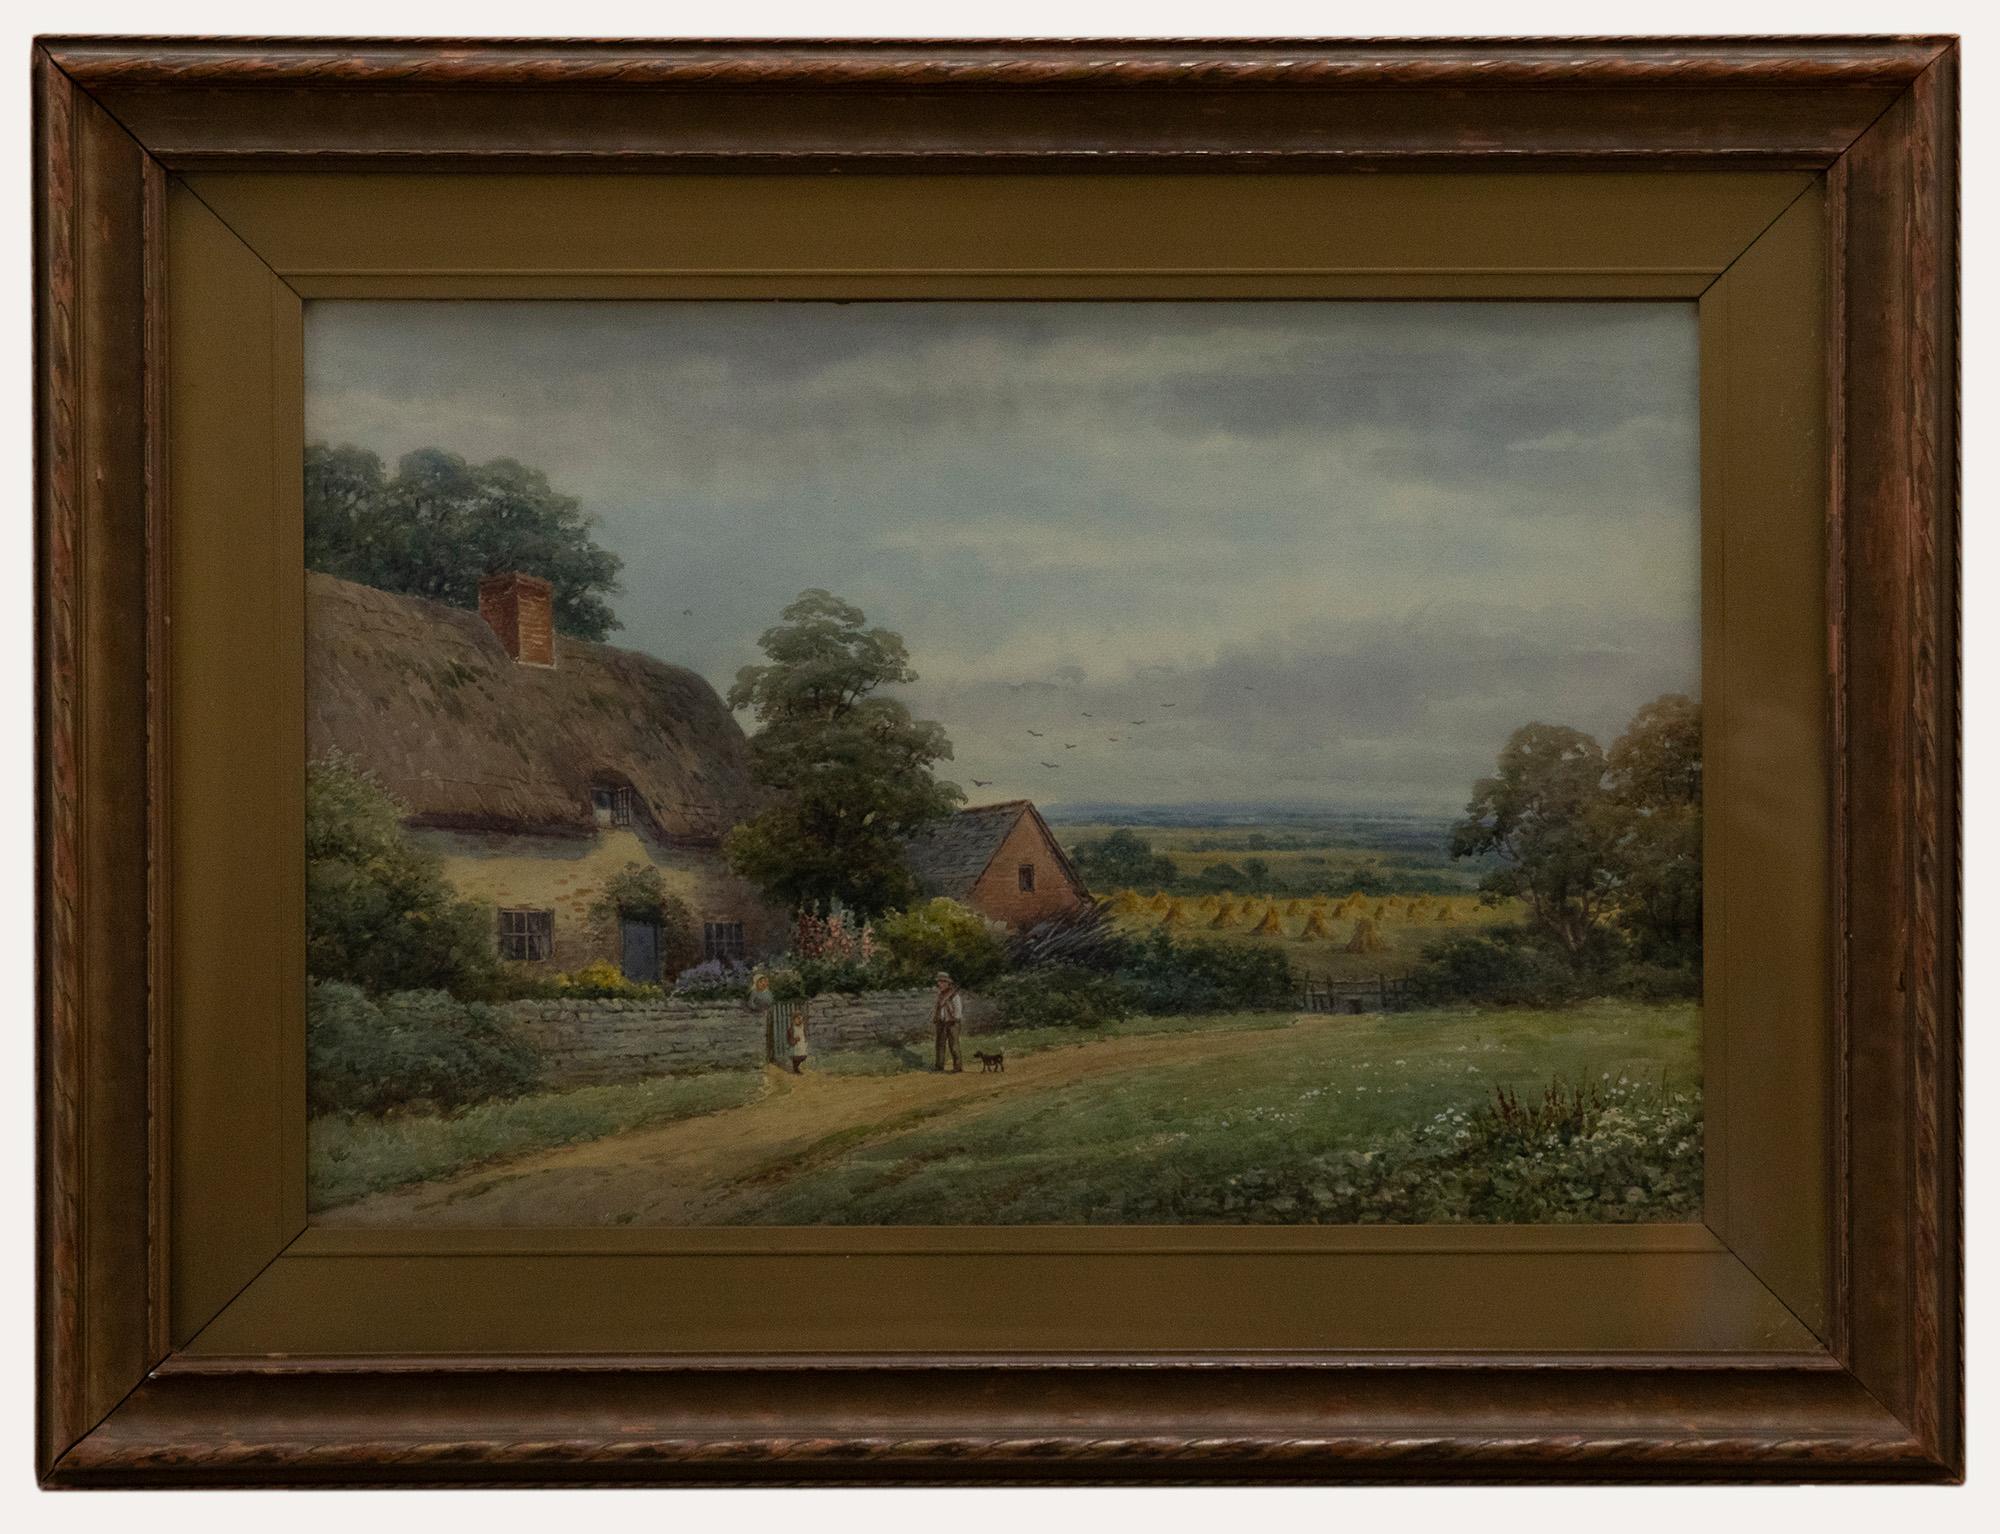 Unknown Landscape Art - Harold Lawes (1865-1940) - Framed Early 20th Century Watercolour, End of Day